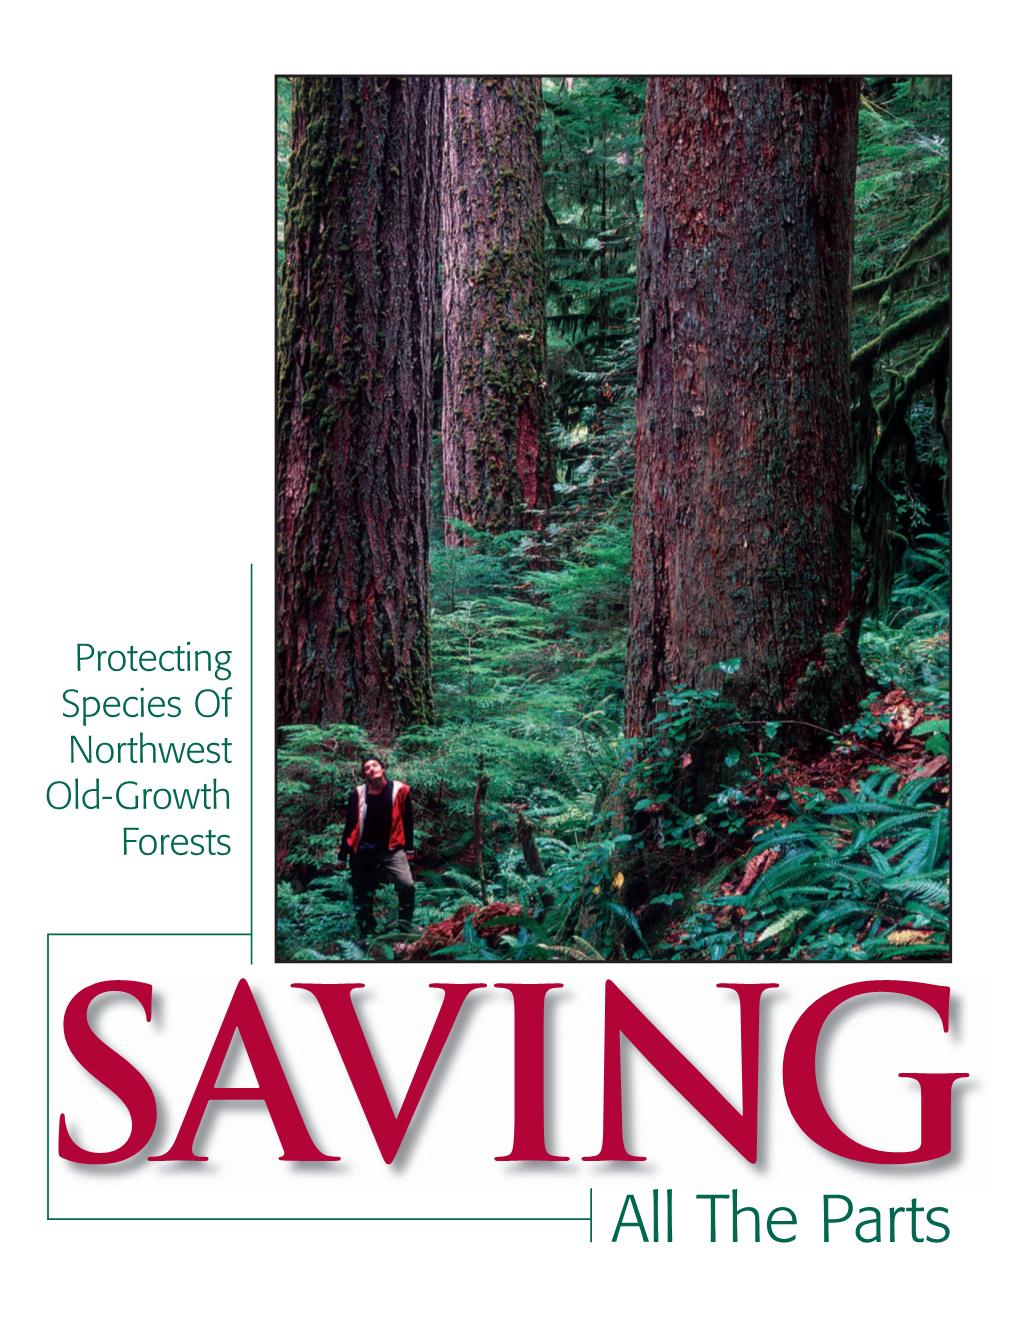 Saving All the Parts: Protecting Northwest Old-Growth Forests